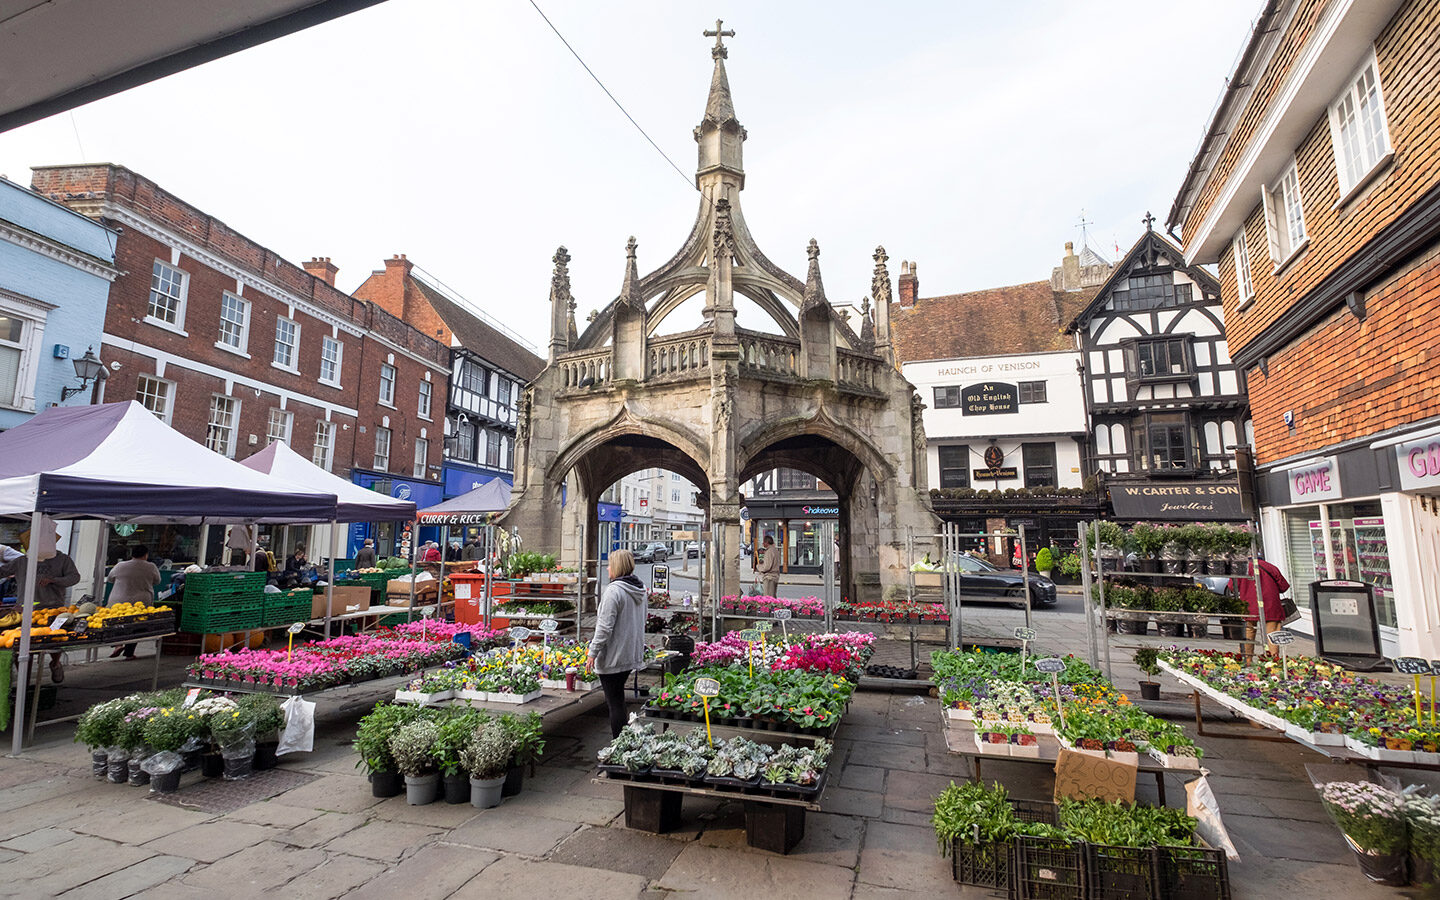 The Poultry Cross and market in Salisbury, Wiltshire